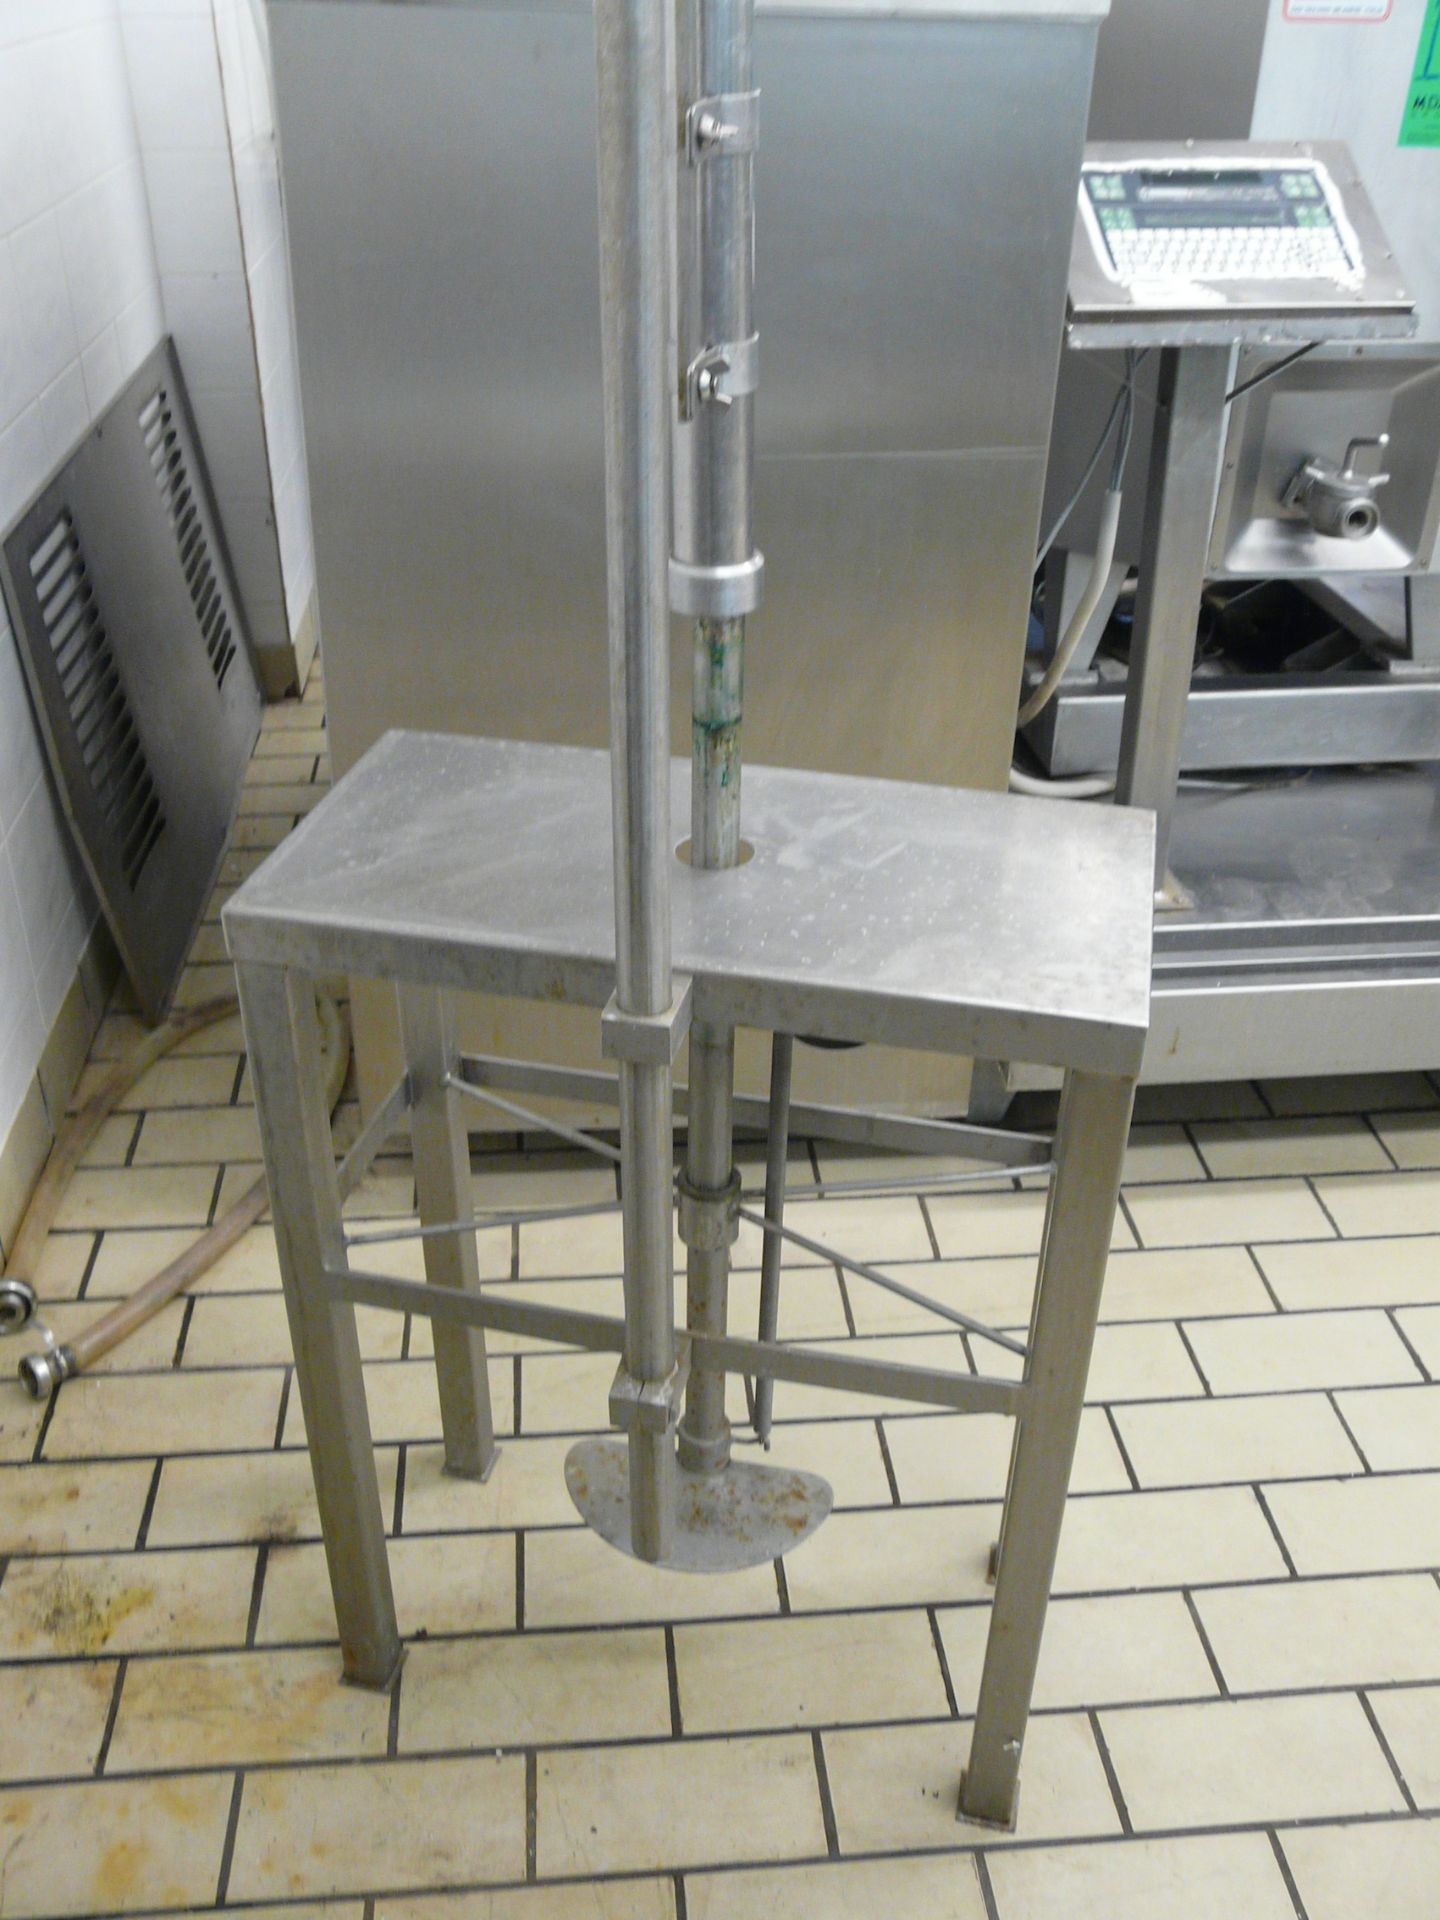 English: Single Head Filler With Stainless Steel Table for Ice Cream Tubs. Manual Filling . Greek: - Image 2 of 3